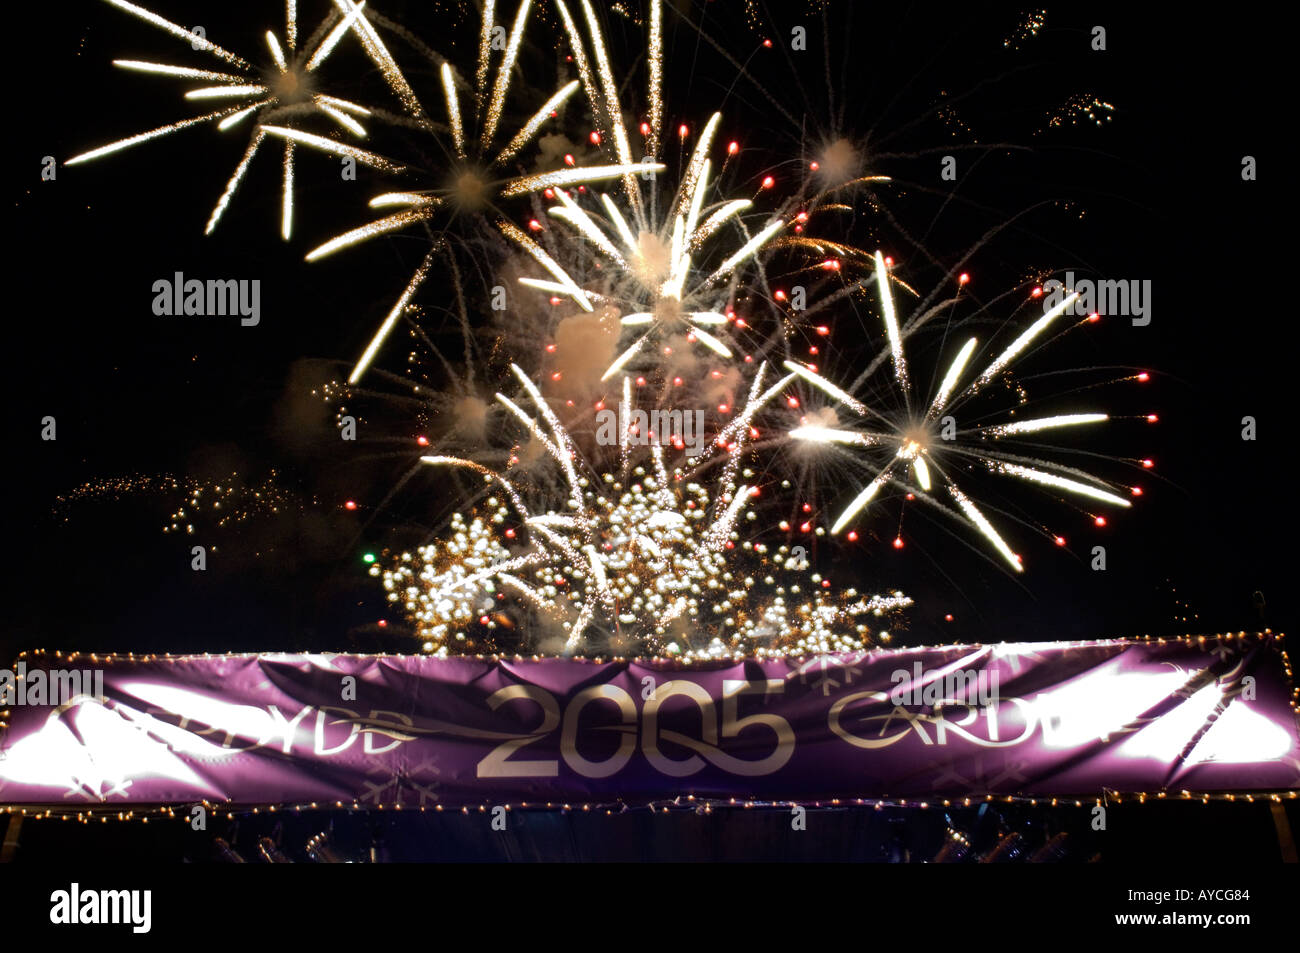 Spectacular Fireworks against Night Sky with Cardiff 2005 banner Stock Photo